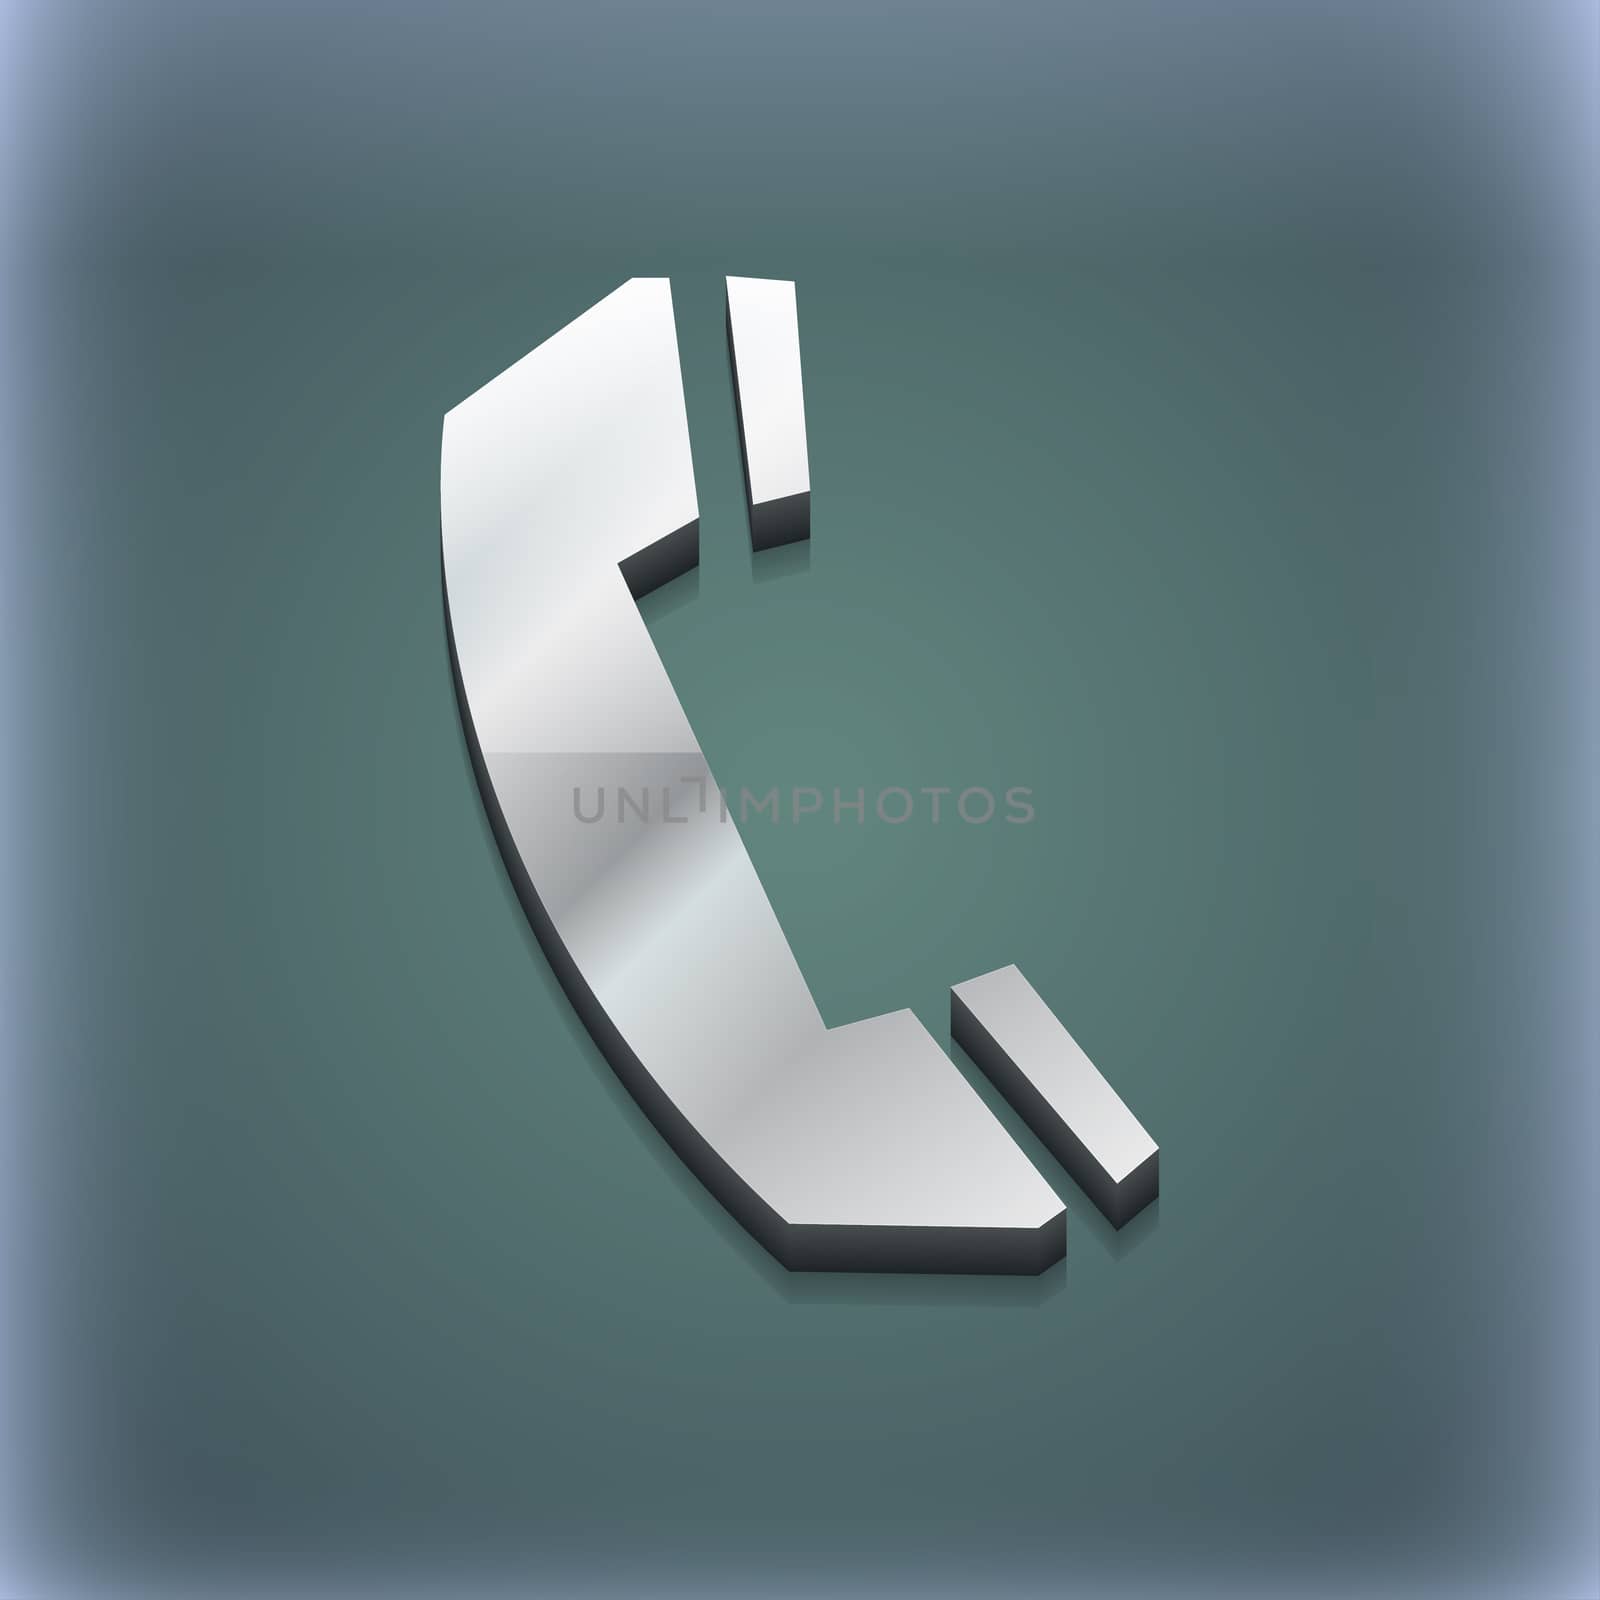 Phone icon symbol. 3D style. Trendy, modern design with space for your text illustration. Raster version